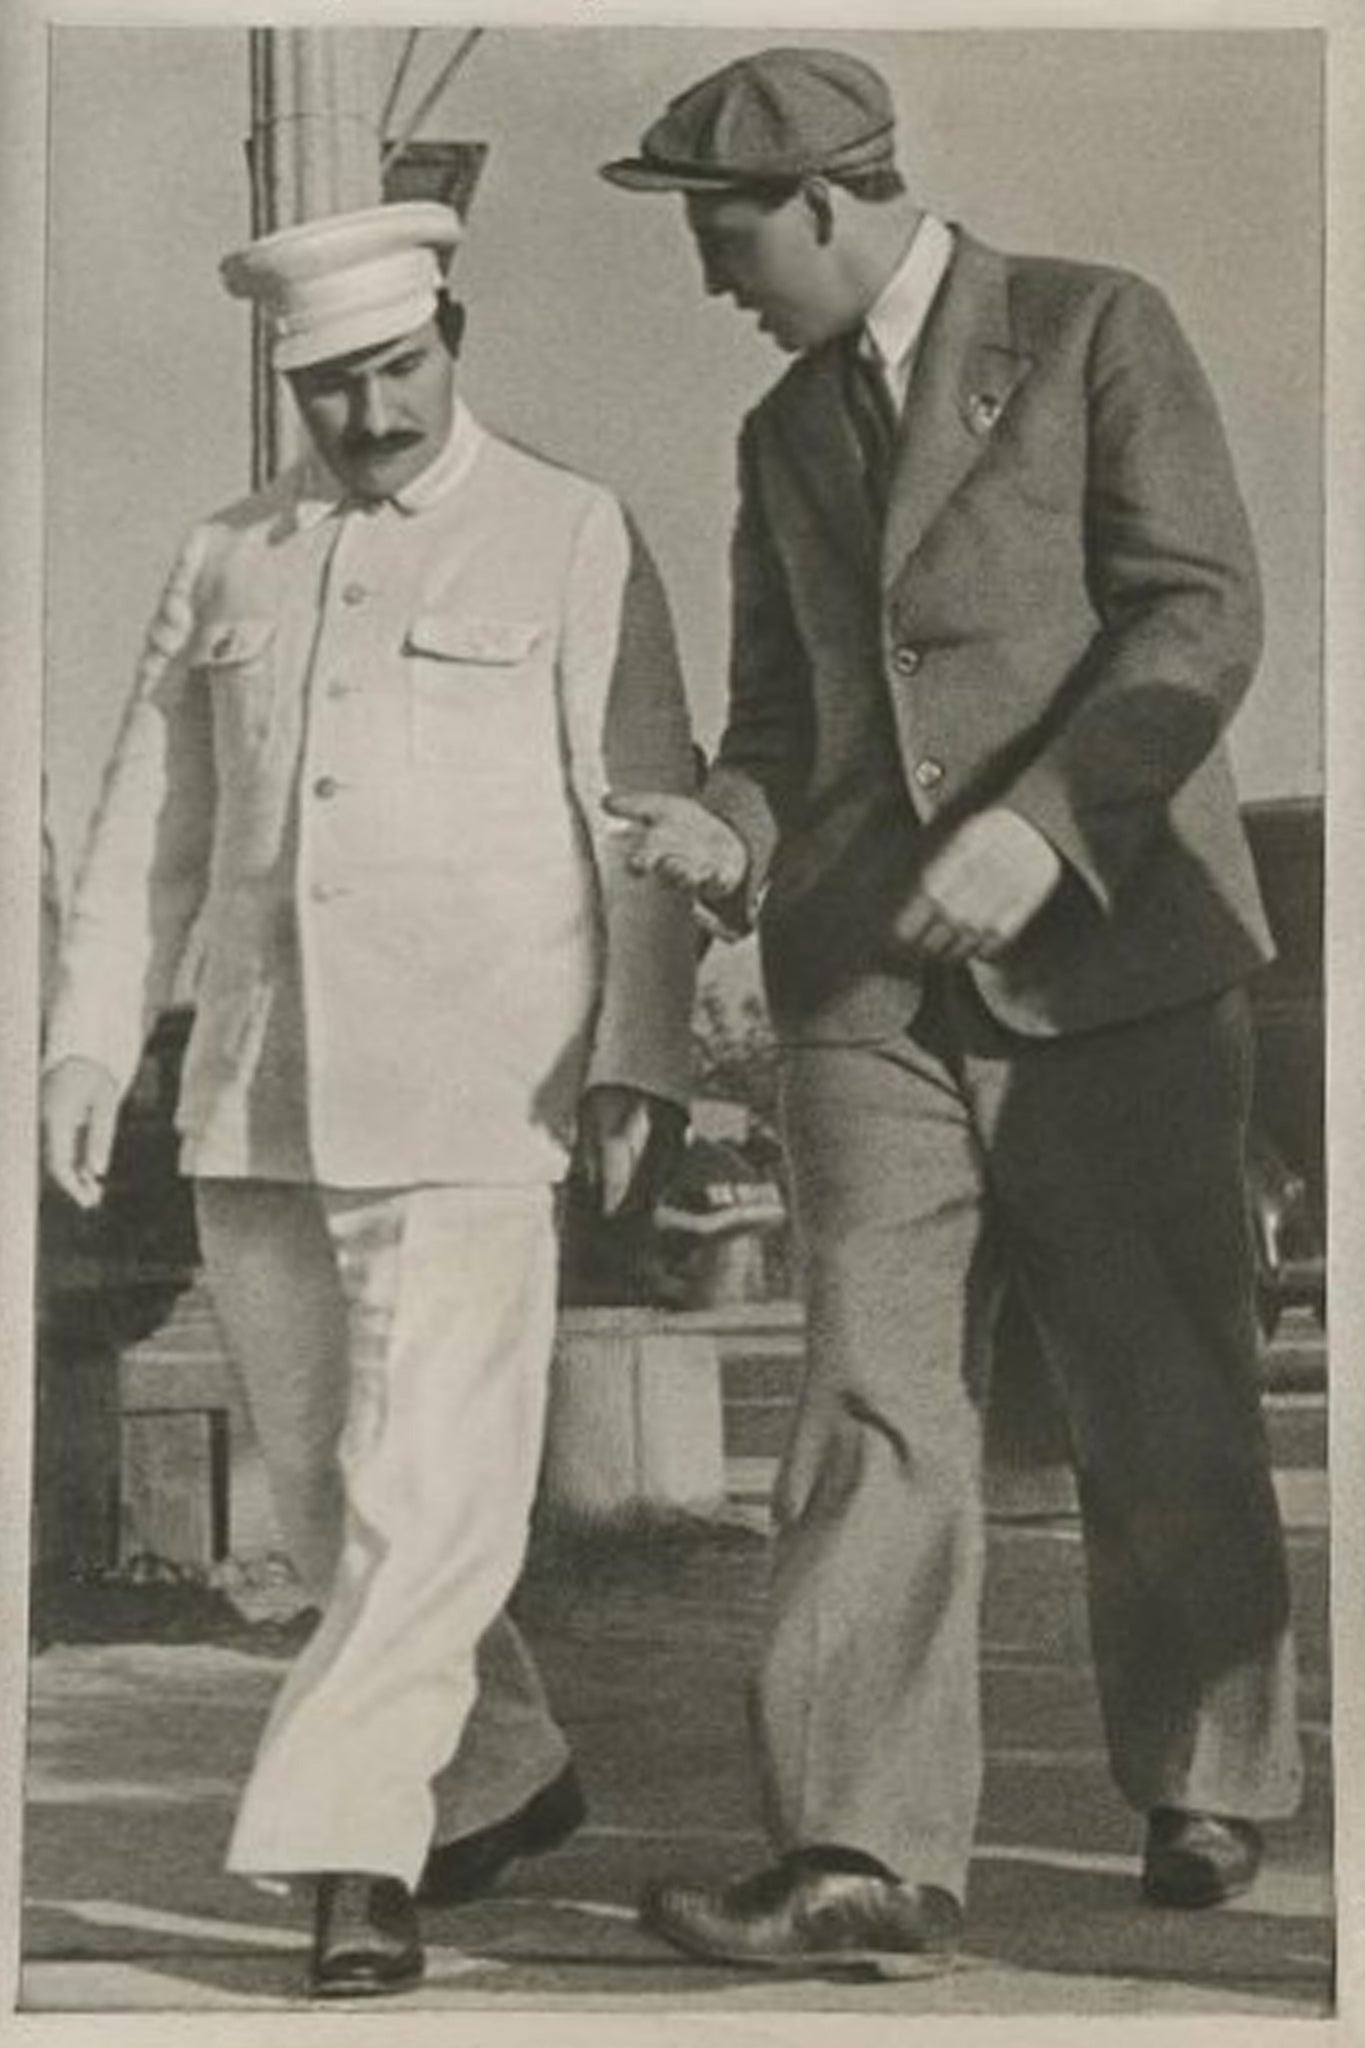 One of Stalin’s most trusted deputies, Lazar Kaganovich, with Alexei Stakhanov in 1938